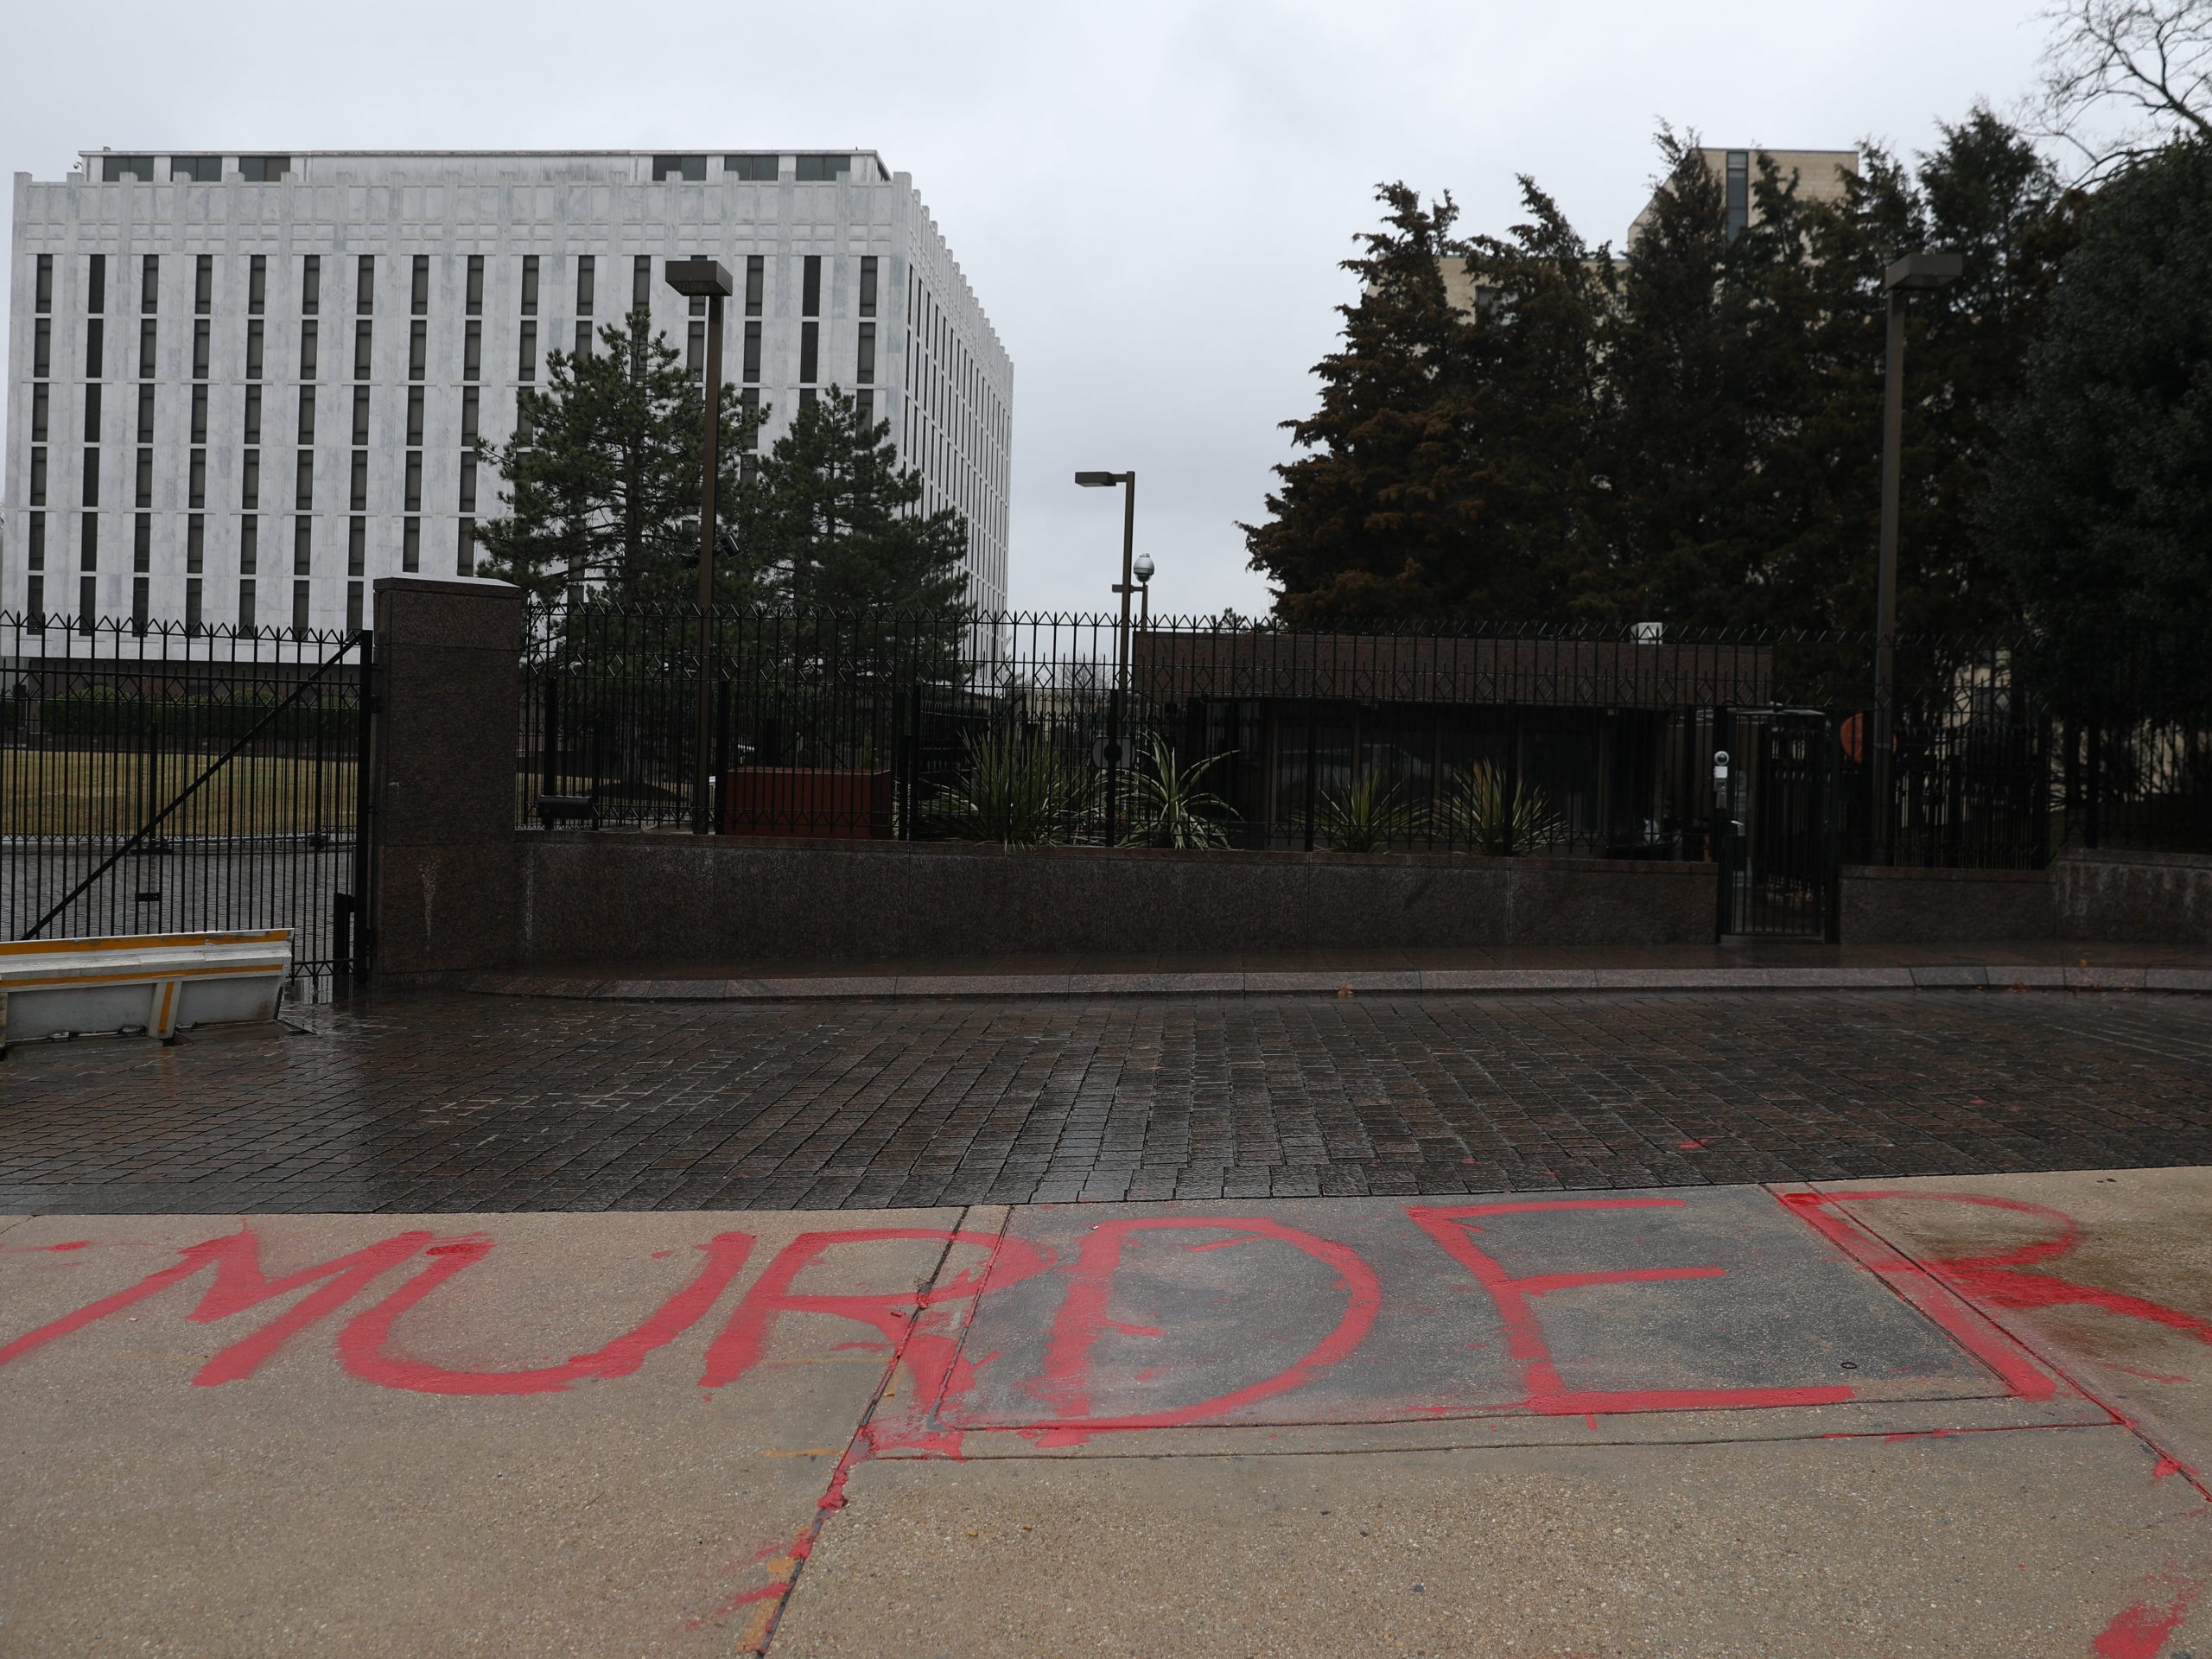 A woman writes "murder" in front of the Russia's Embassy in Washington to protest against Russian intervention in Ukraine, on February 24, 2022 in Washington, United States.